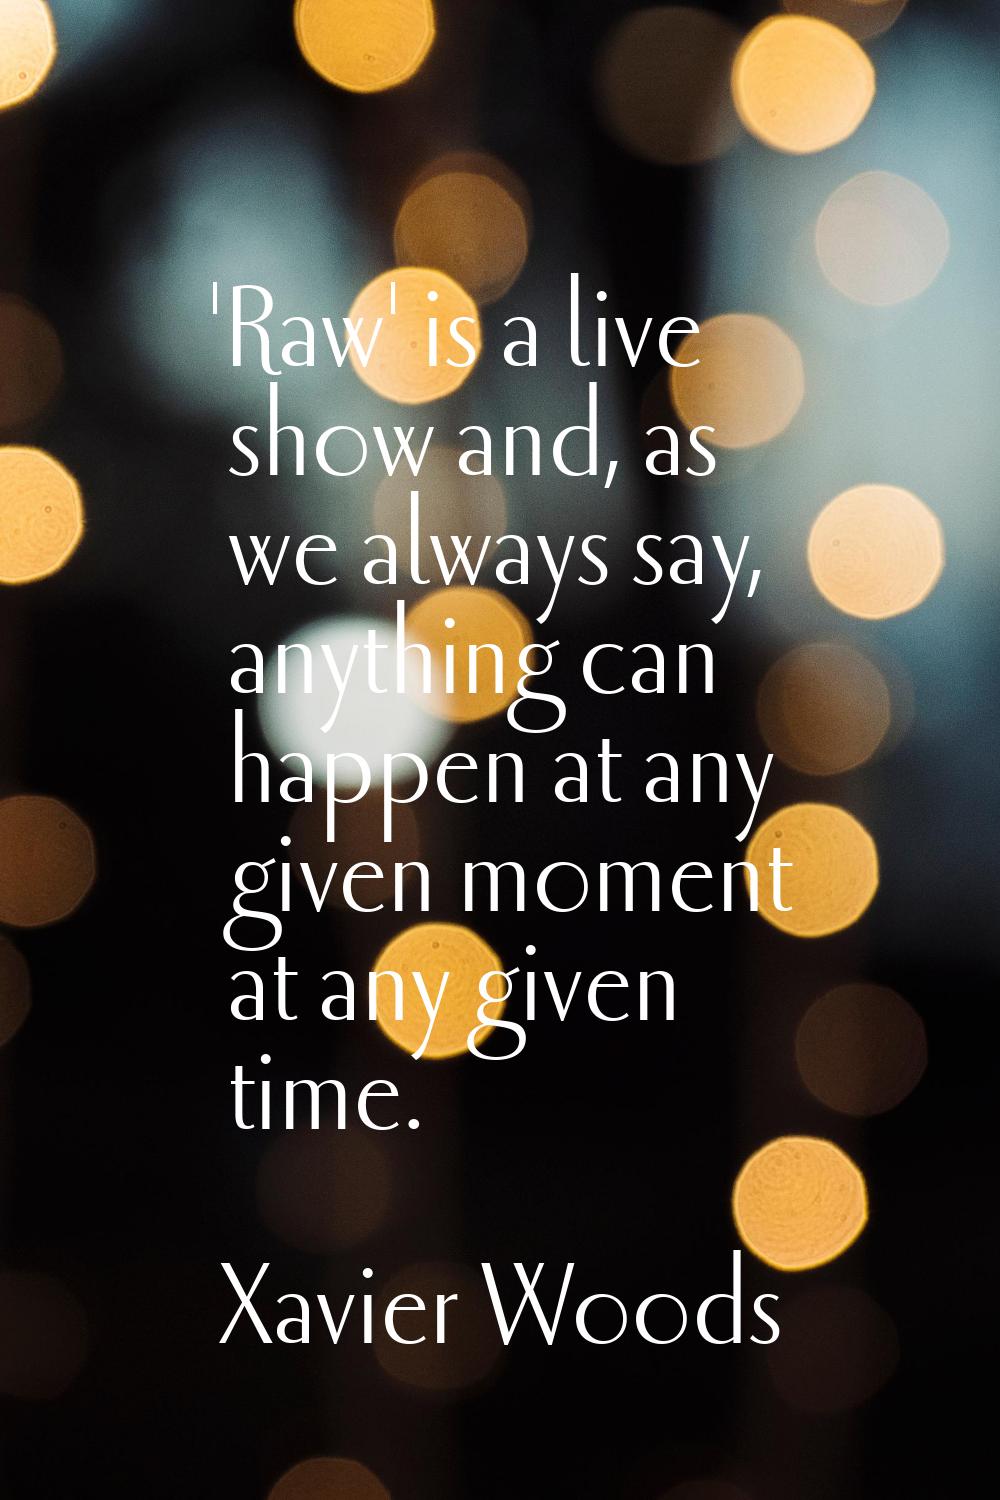 'Raw' is a live show and, as we always say, anything can happen at any given moment at any given ti